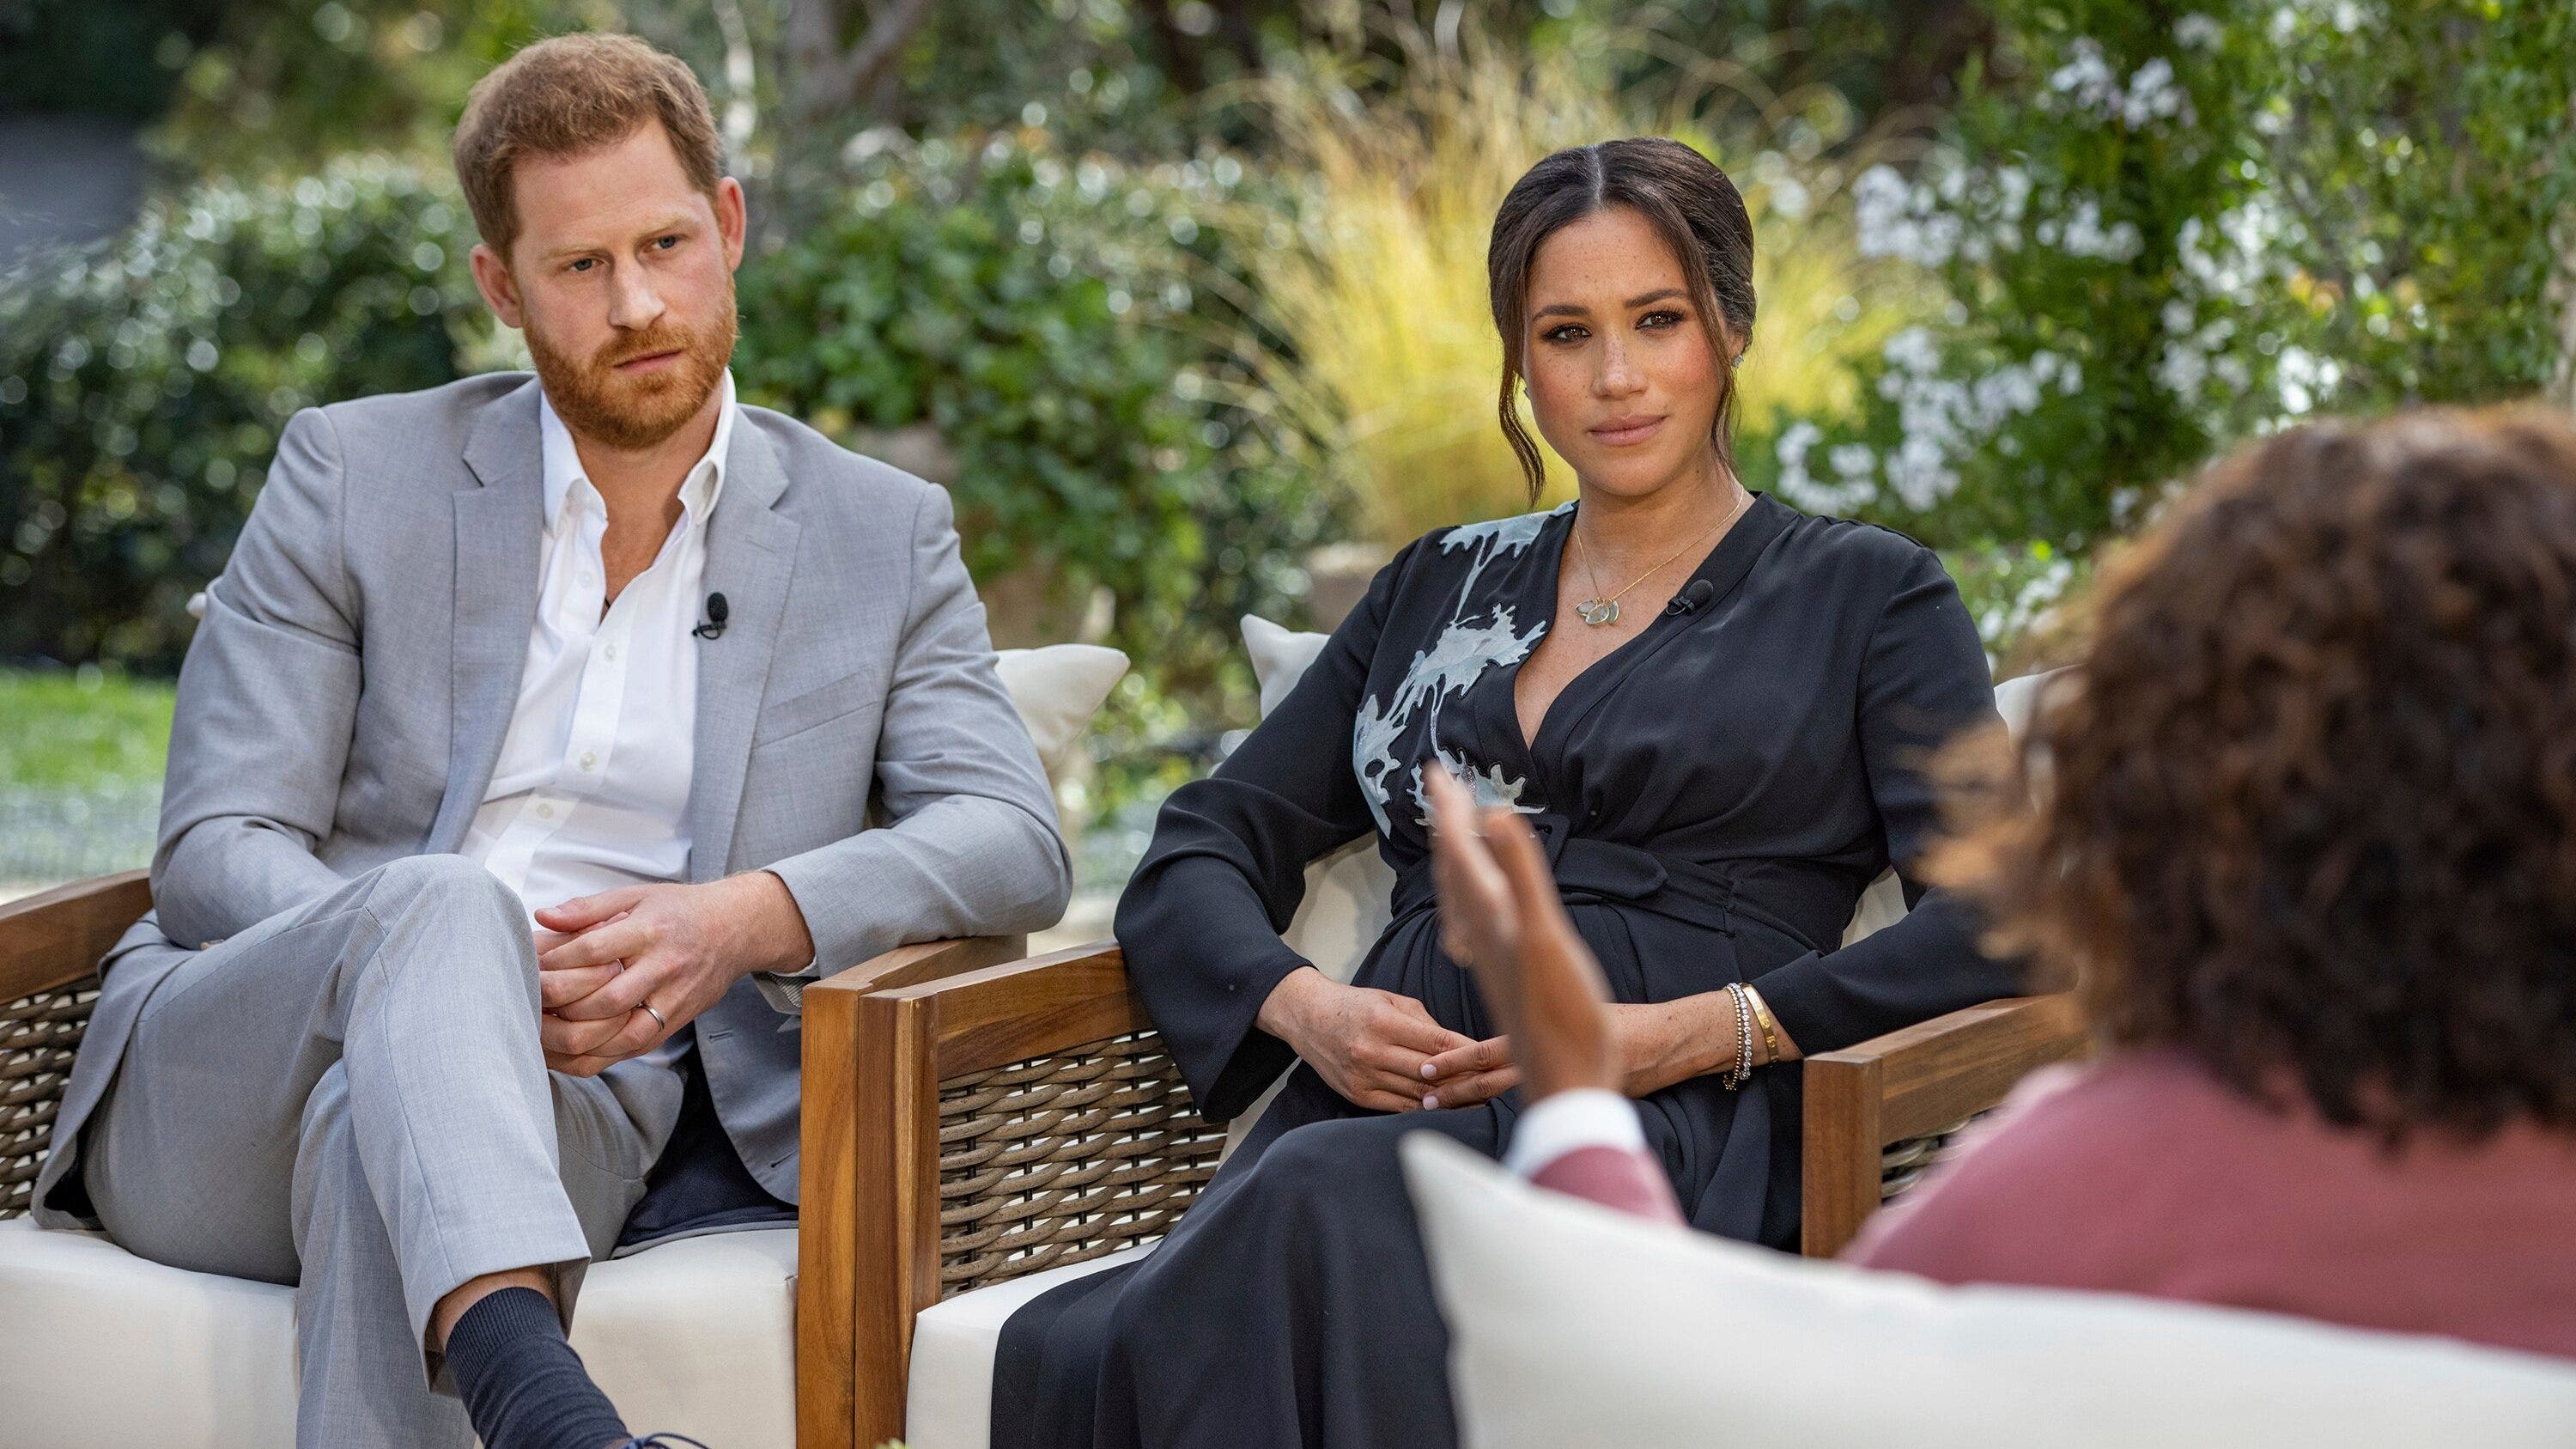 While Oprah’s Meghan and Harry interview aired Sunday, some critics are already sick of royal mania